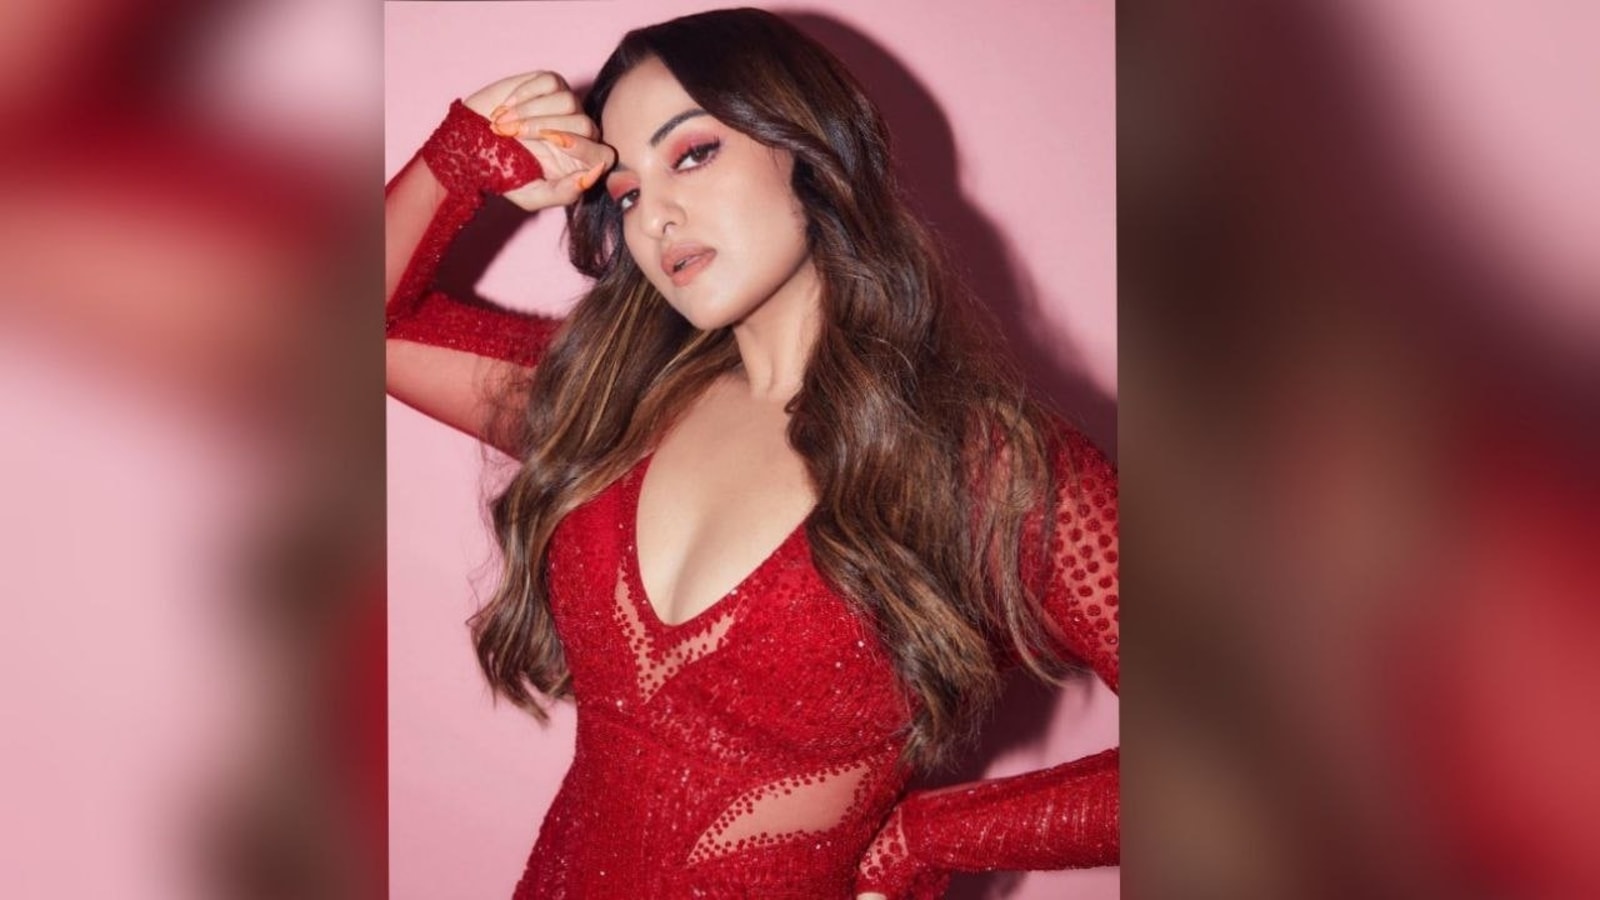 Sonakshi Sinha Xnx Video - Sonakshi Sinha goes bold in a shimmery red hot thigh-high slit dress |  Hindustan Times